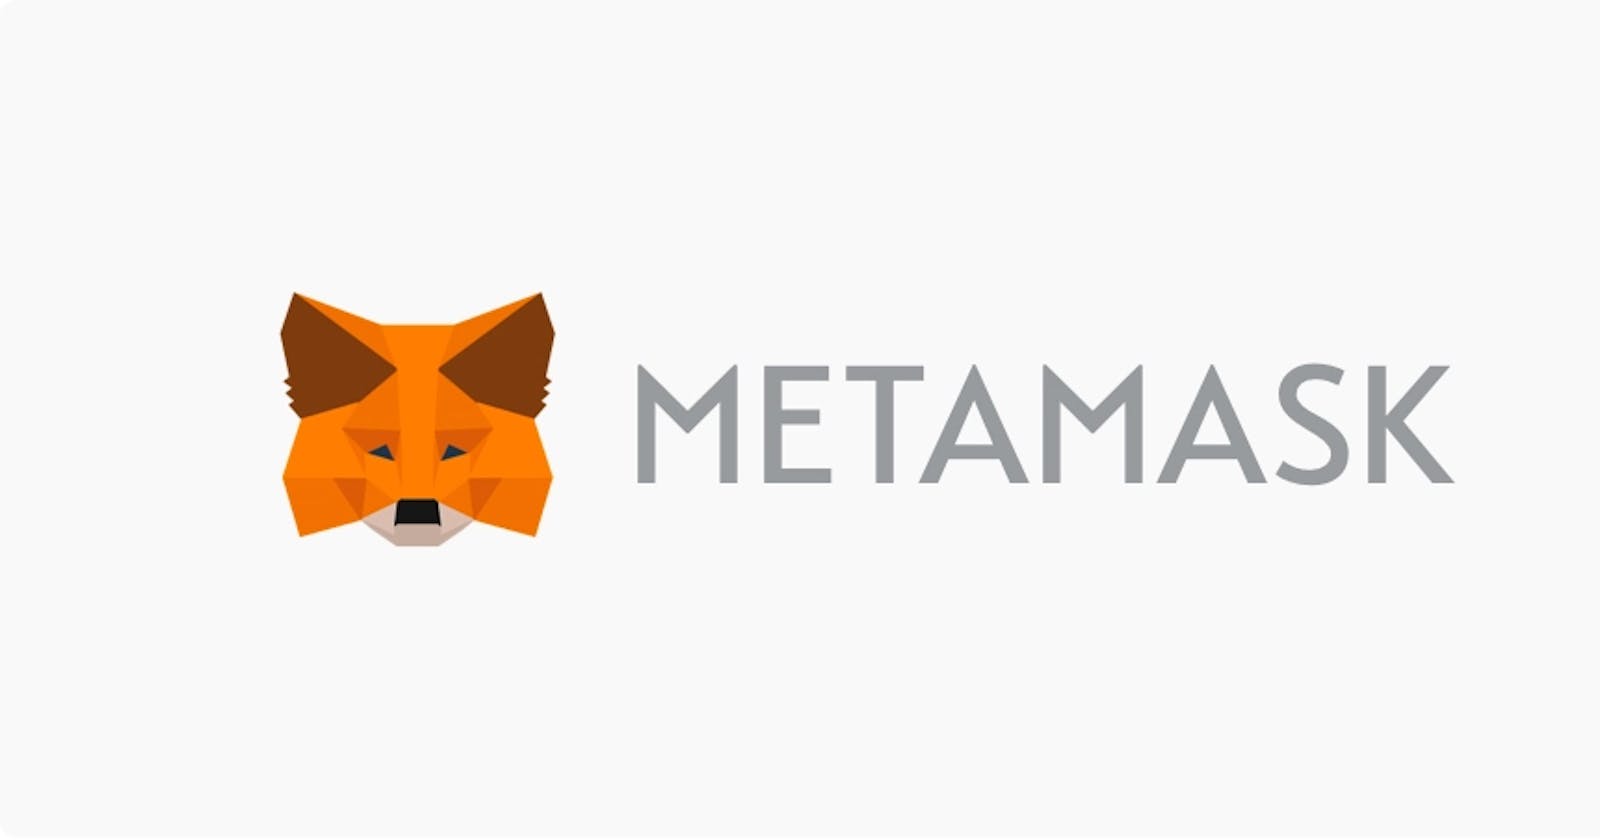 Metamask- the wallet of future